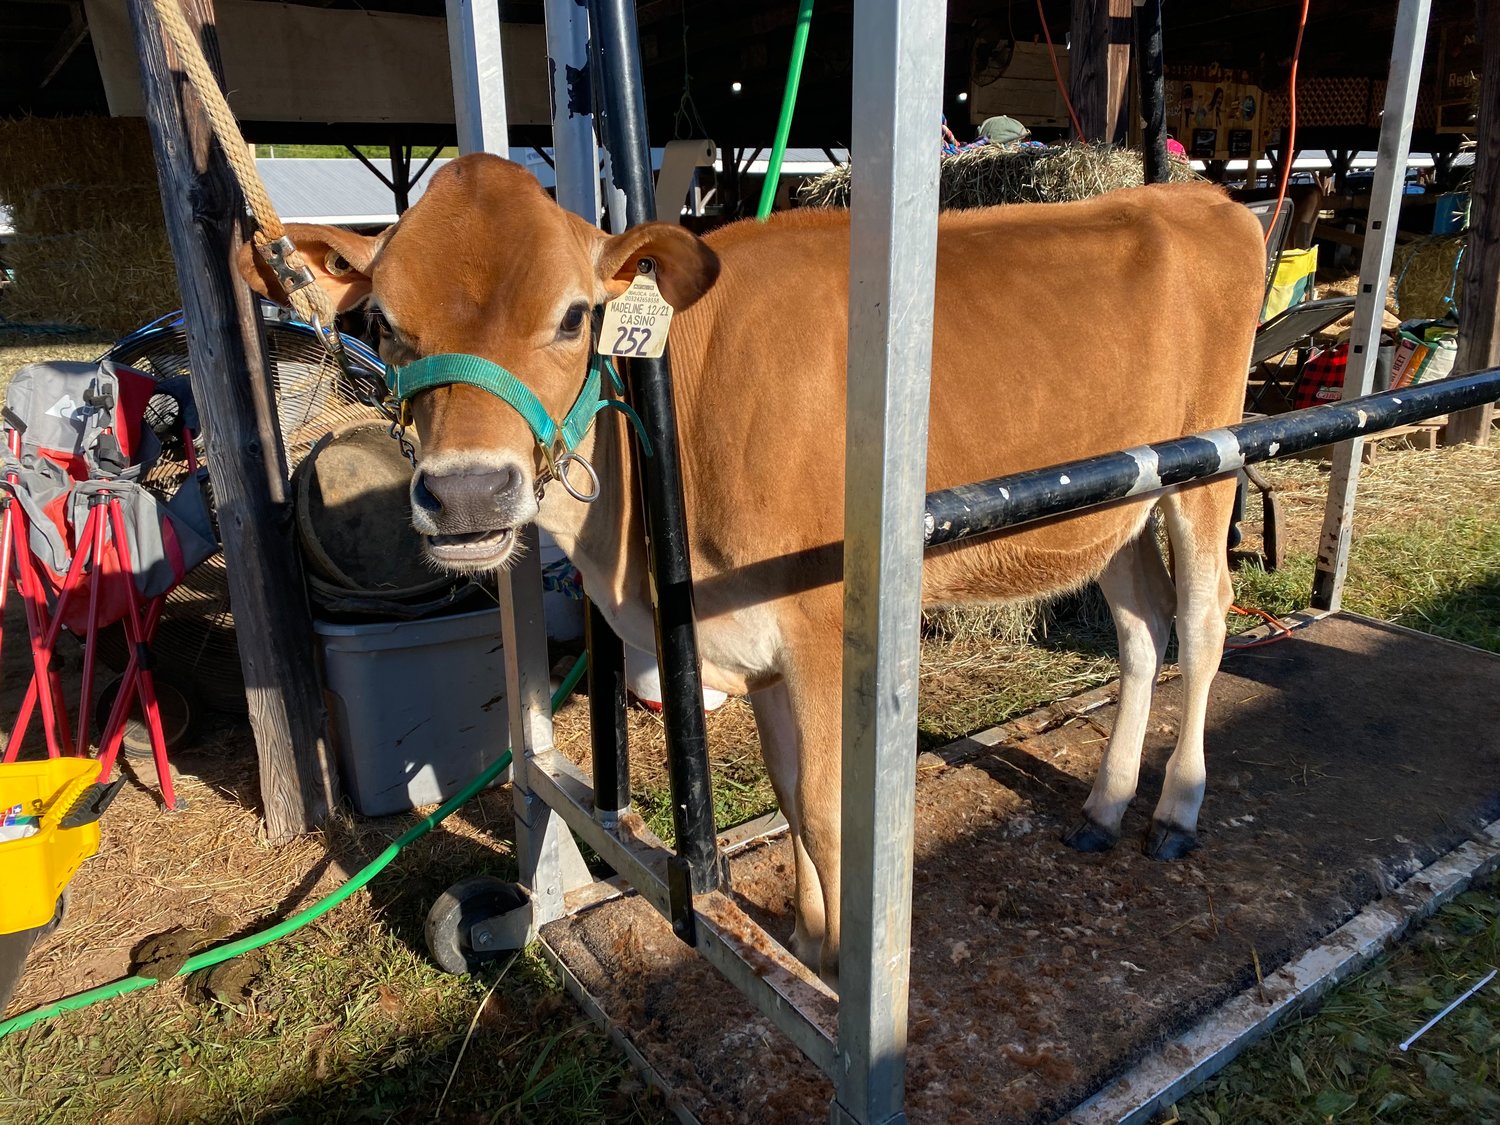 The Jersey Parish Show was held on Sunday, Aug. 14. Exhibitors readied their livestock, by bathing and clipping them, early in the morning.